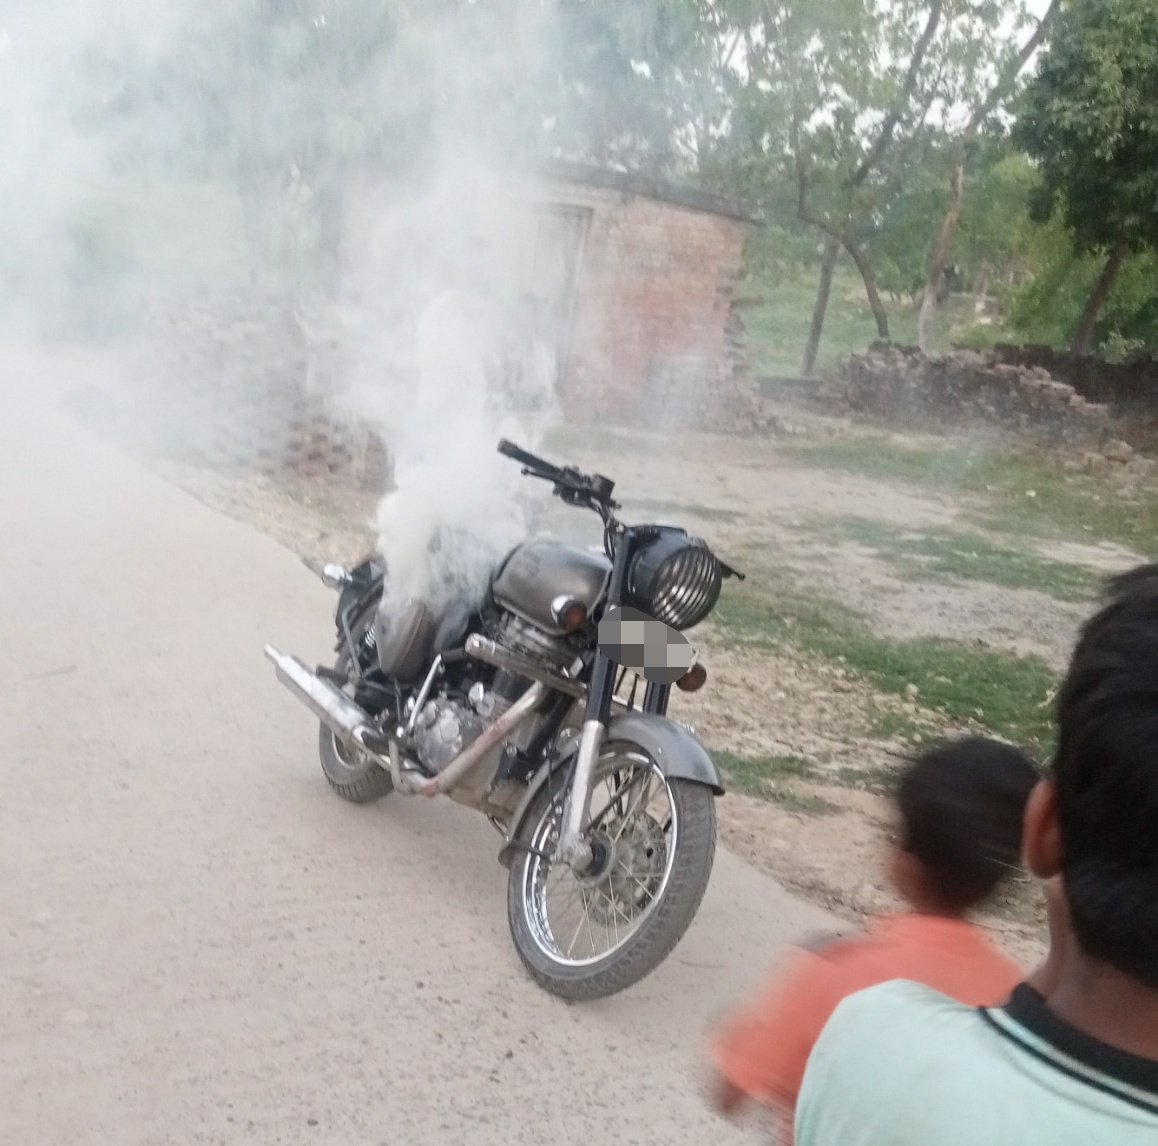 It is my Royal Enfield Gunmetal grey 350 cc bike purchase in 2019. But today one major accident of my bike. How is the smoke coming out and from where? I don't understand. Please explain @royalenfield @bulletbike